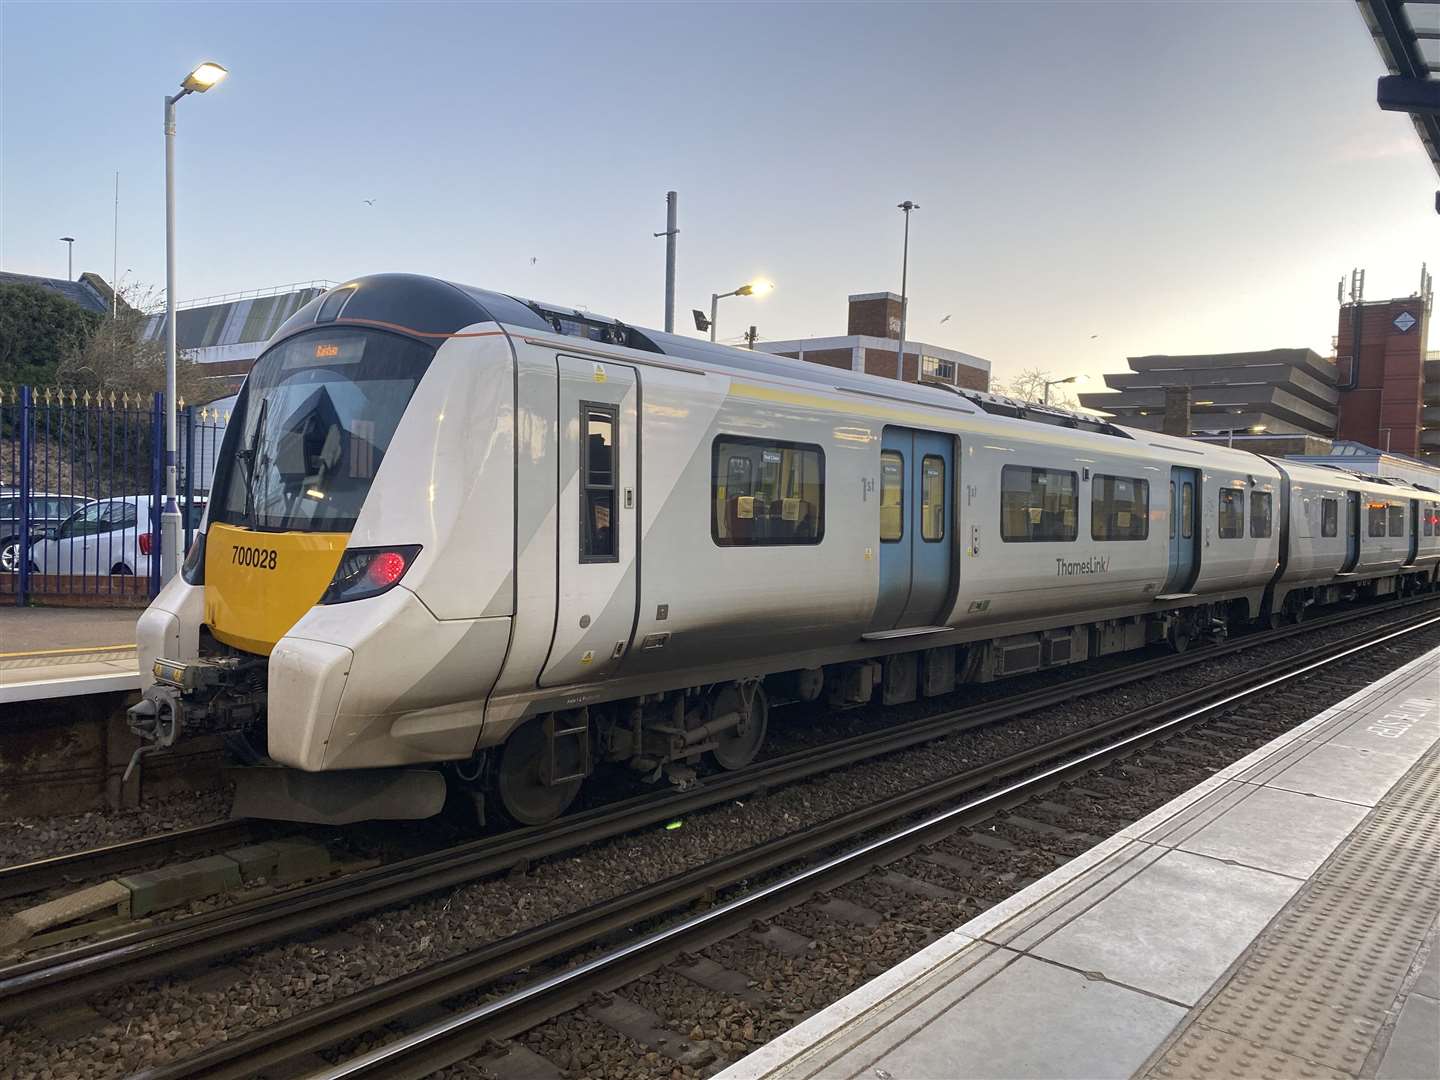 Thameslink services between Medway and Luton will be affected